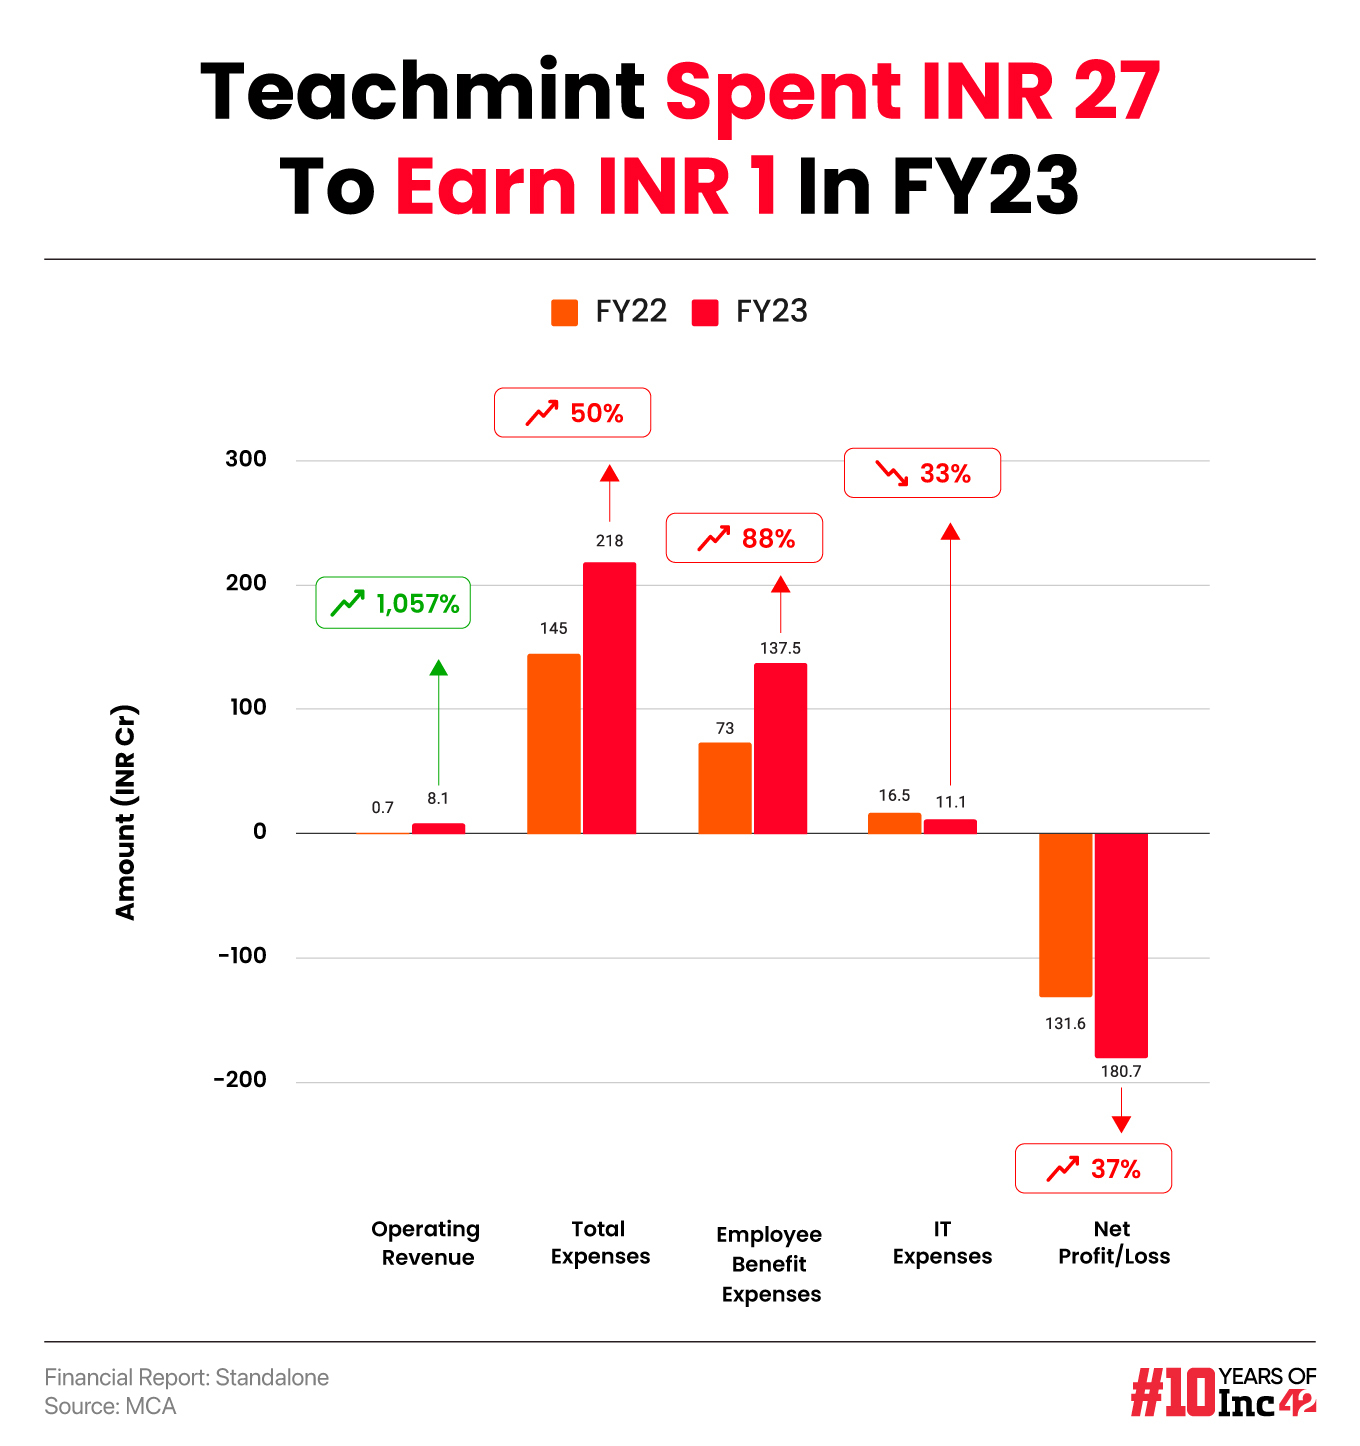 Teachmint Spent INR 27 To Earn Every Rupee In FY23